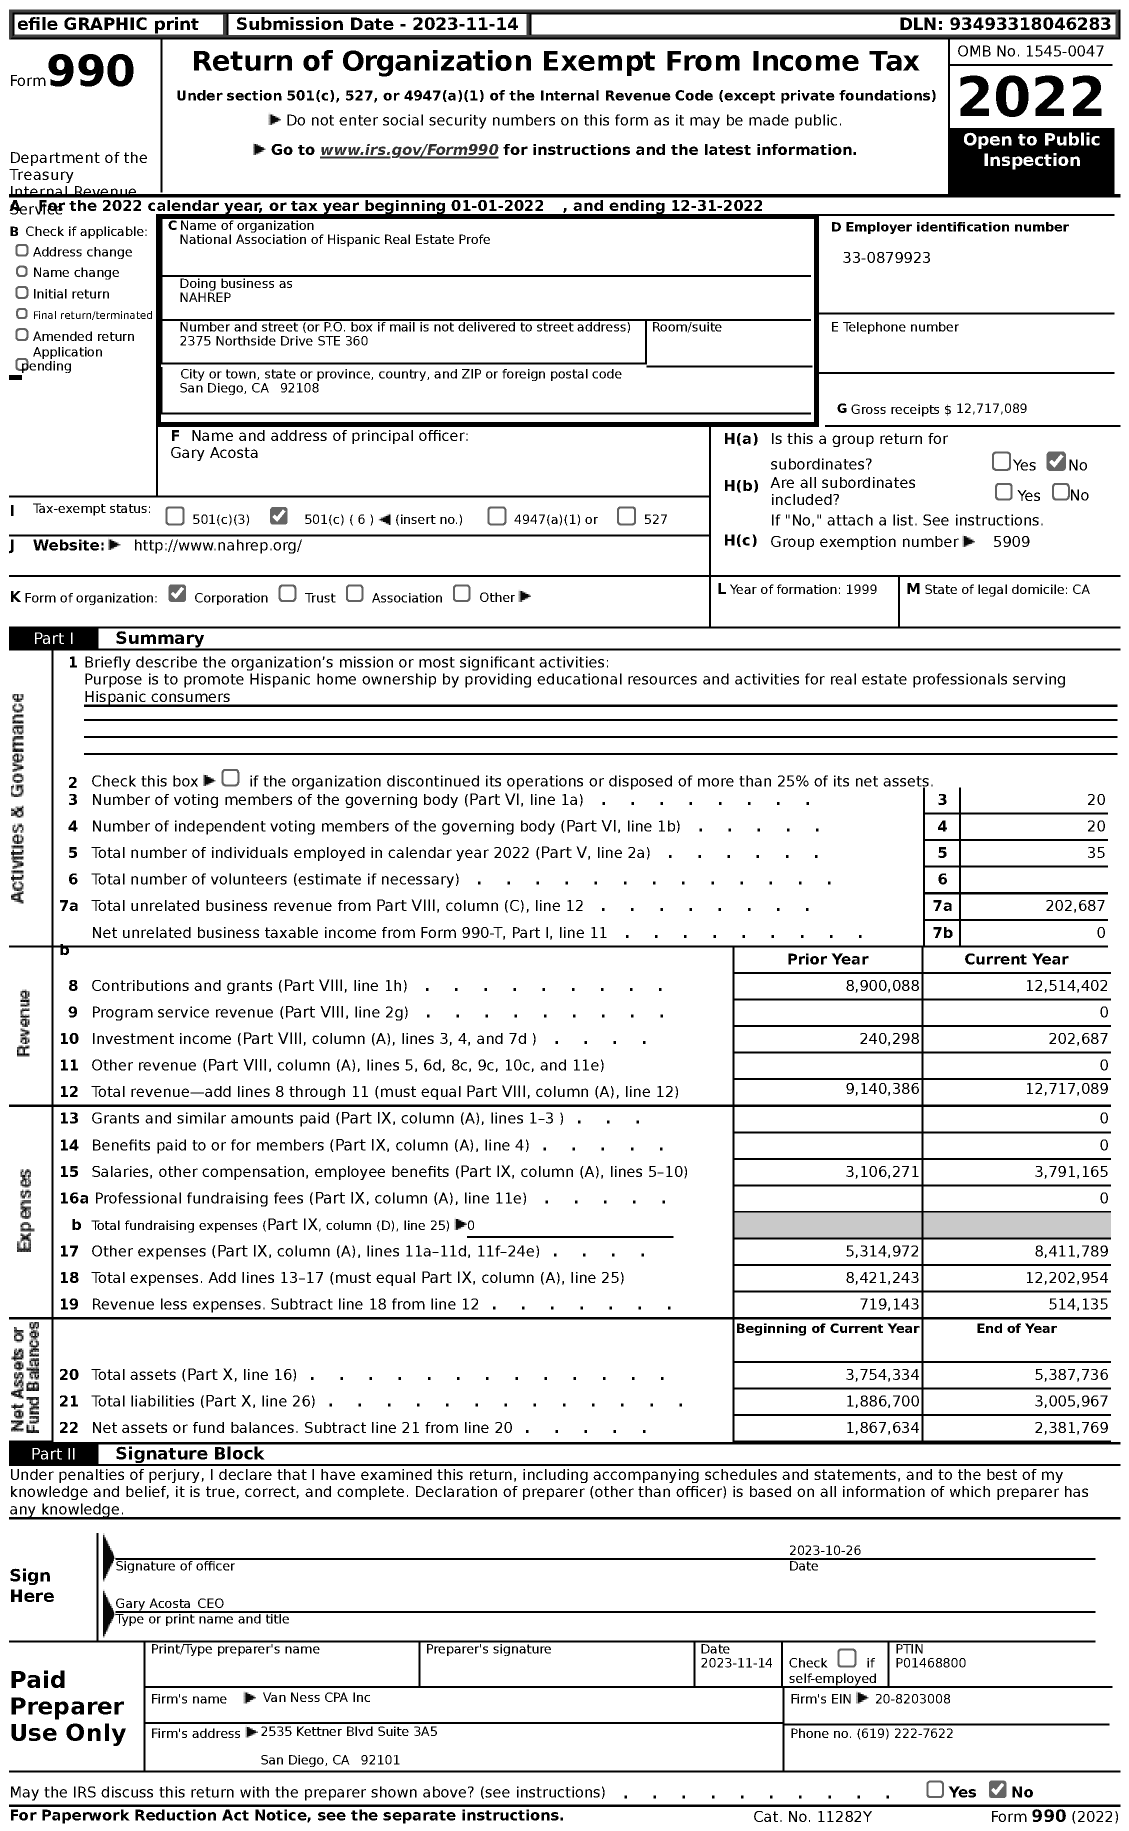 Image of first page of 2022 Form 990 for National Associaton of Hispanic Real Estate Professionals (NAHREP)